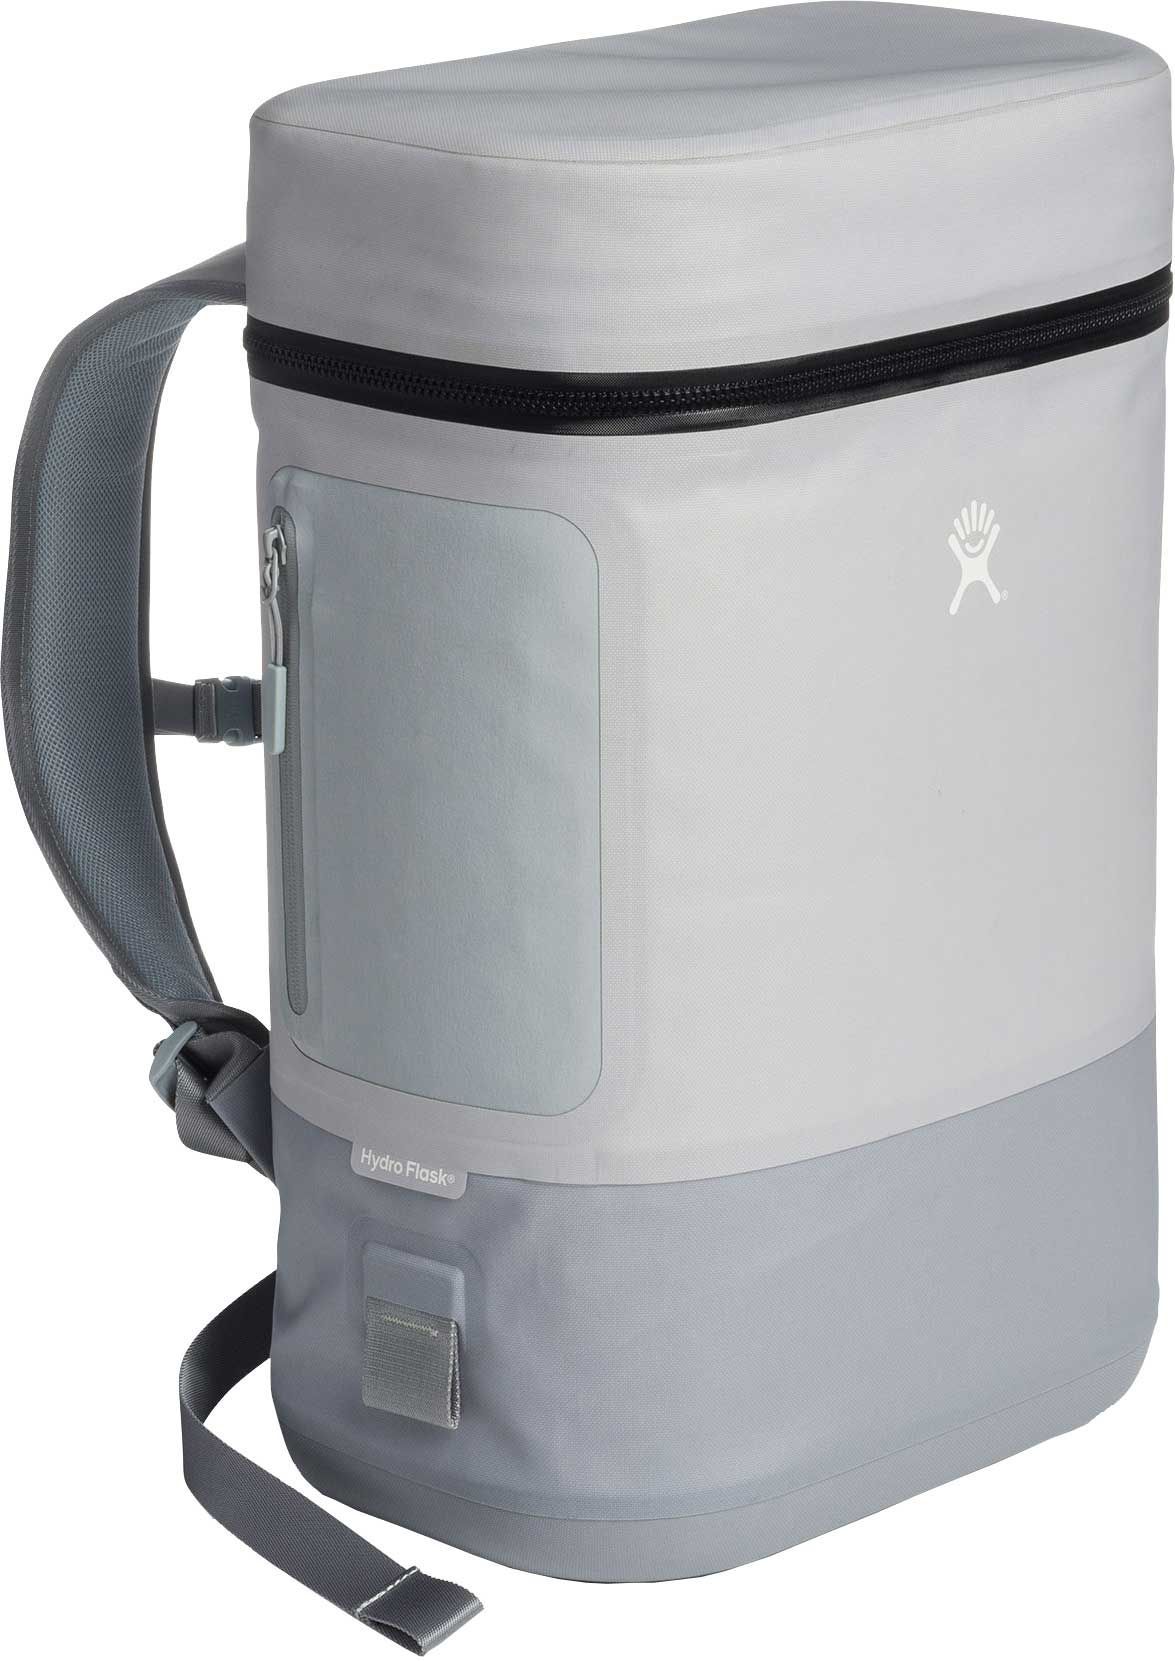 Hydro Flask Unbound Series 22L Soft Cooler Pack | Dick's Sporting Goods